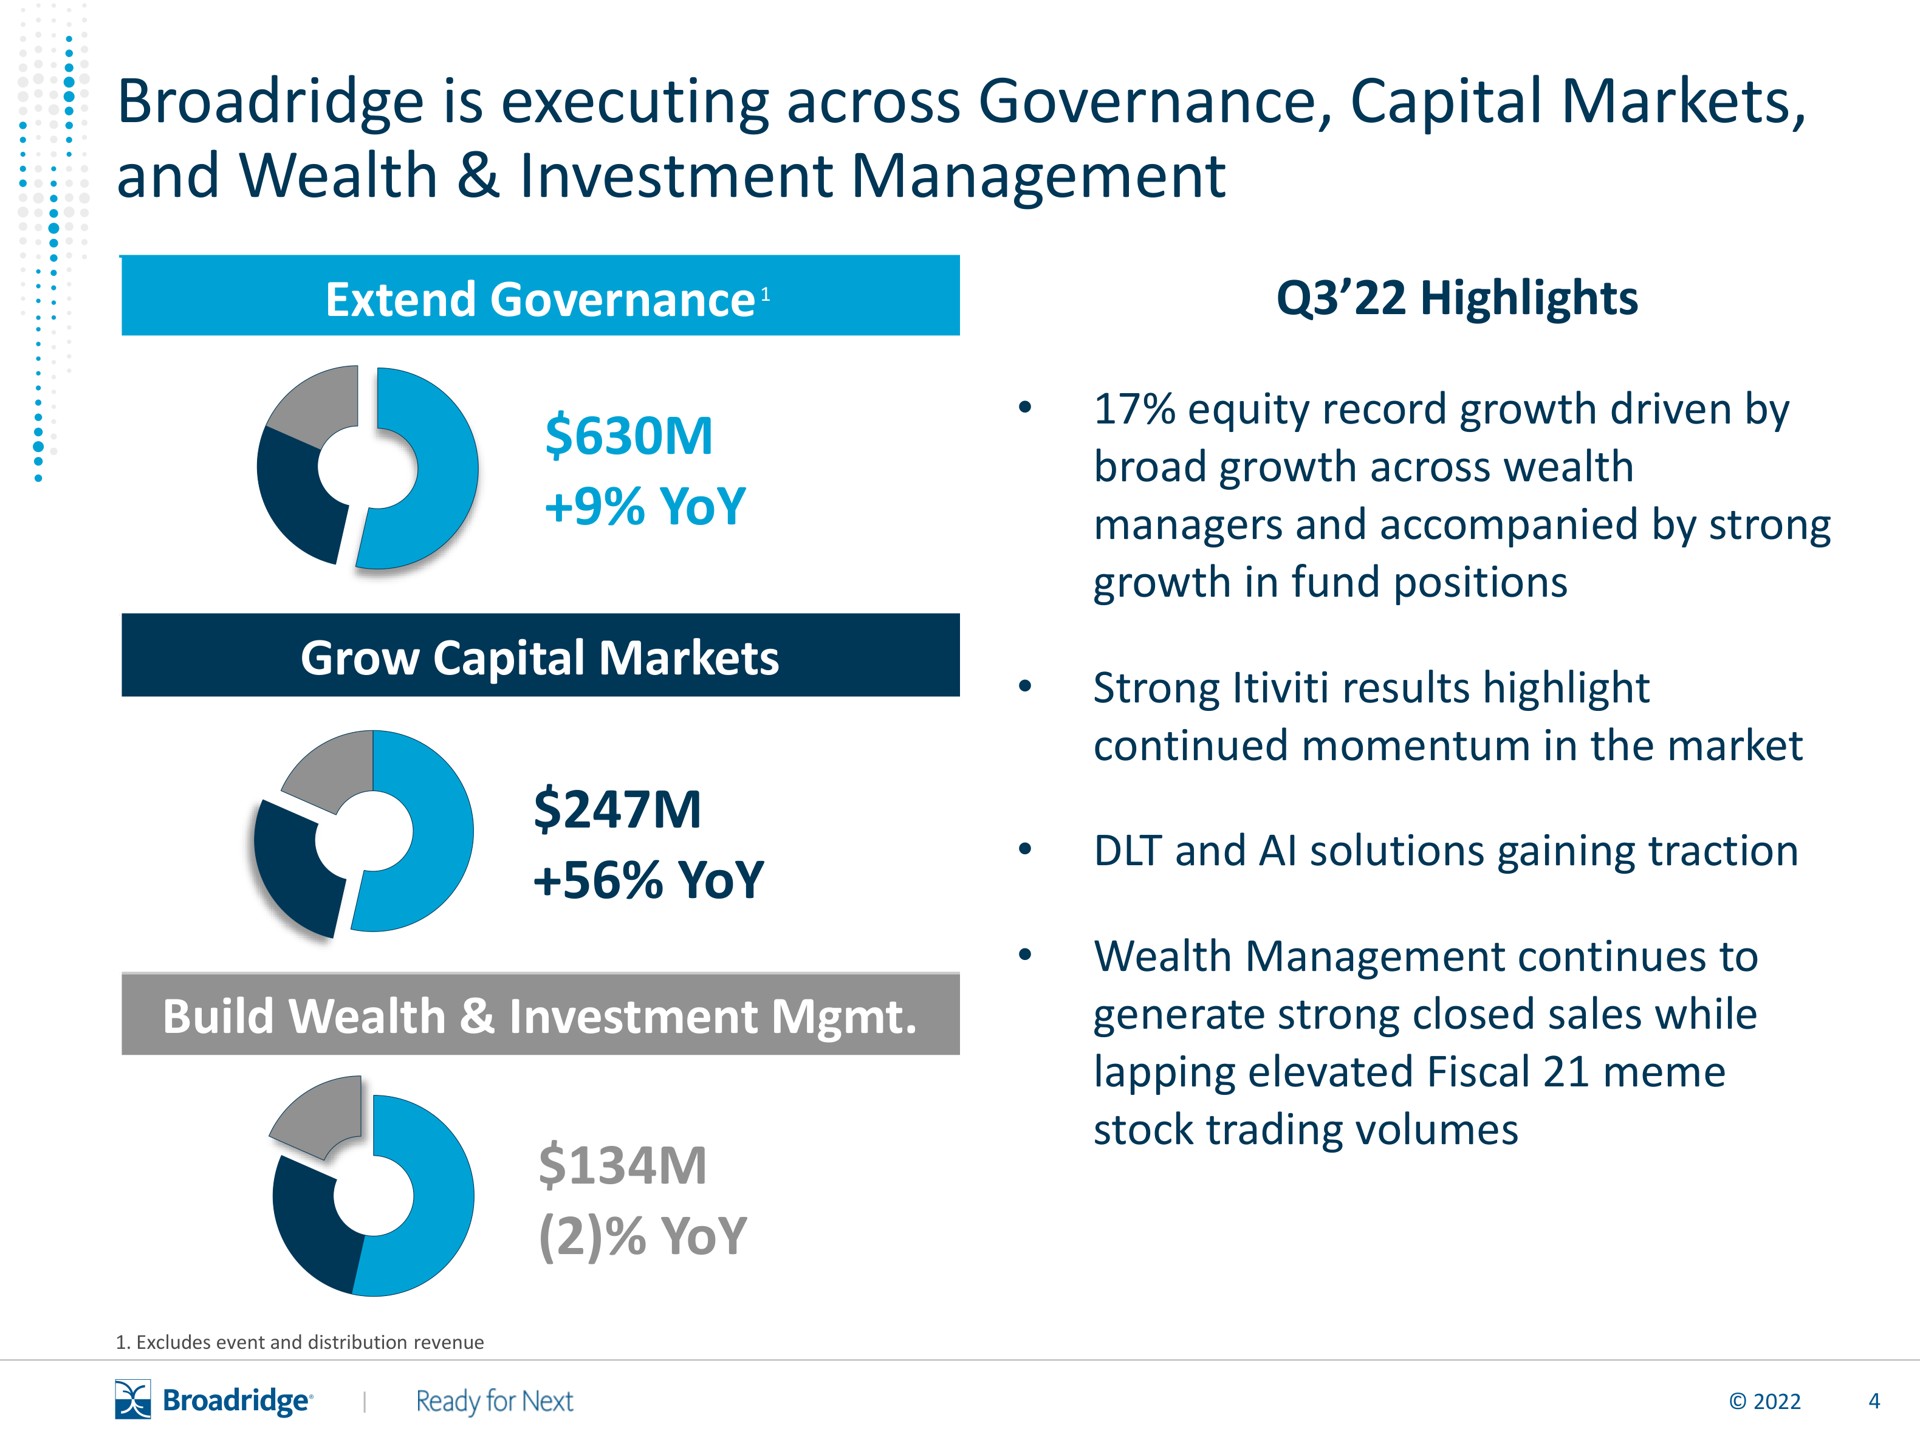 is executing across governance capital markets and wealth investment management extend governance highlights yoy grow capital markets yoy build wealth investment yoy | Broadridge Financial Solutions